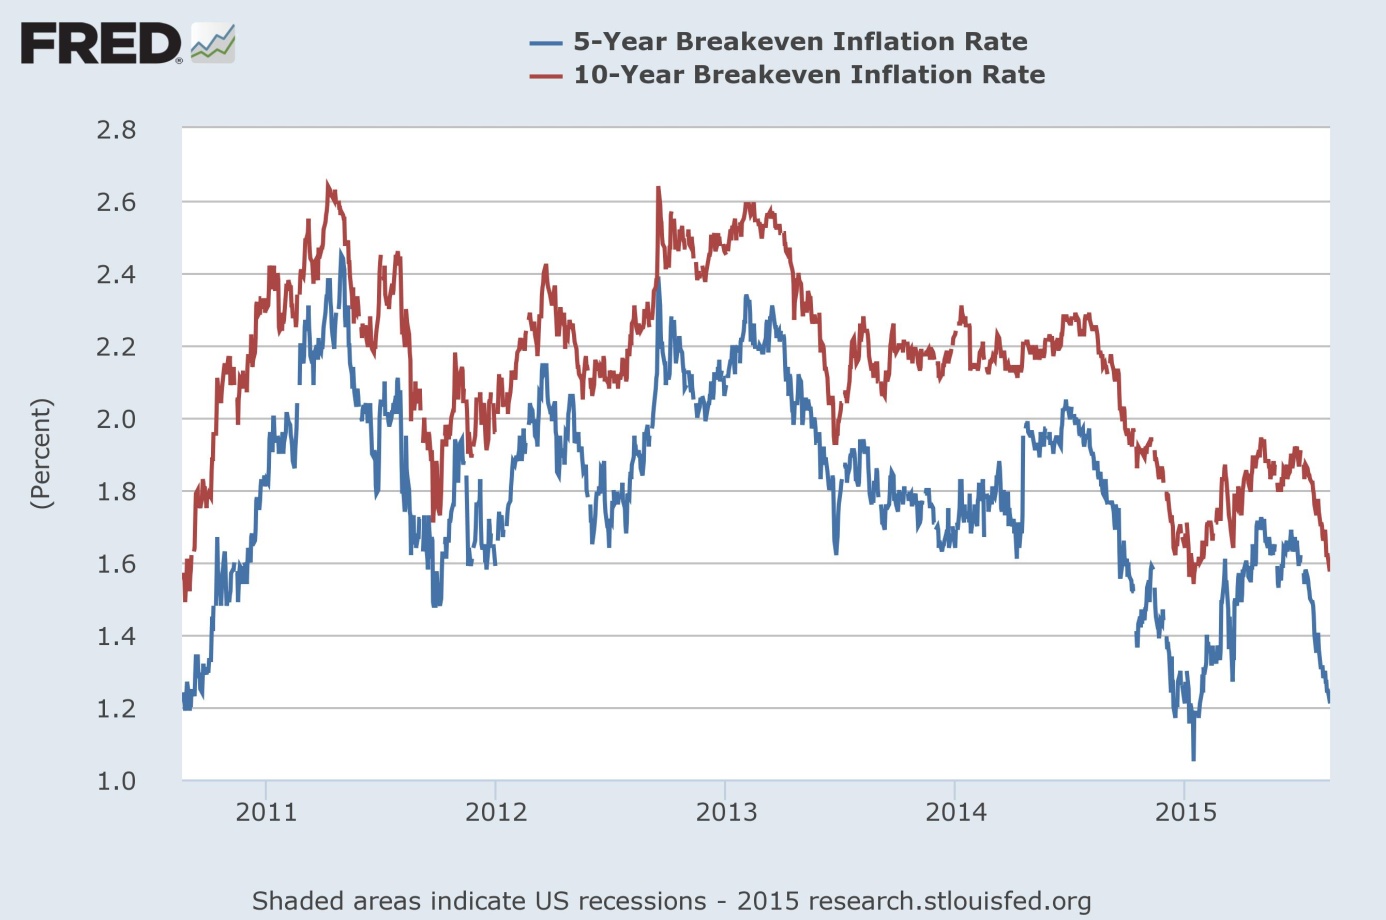 The 5-year (blue line) and 10-year breakeven inflation rates from 2010 to 2015